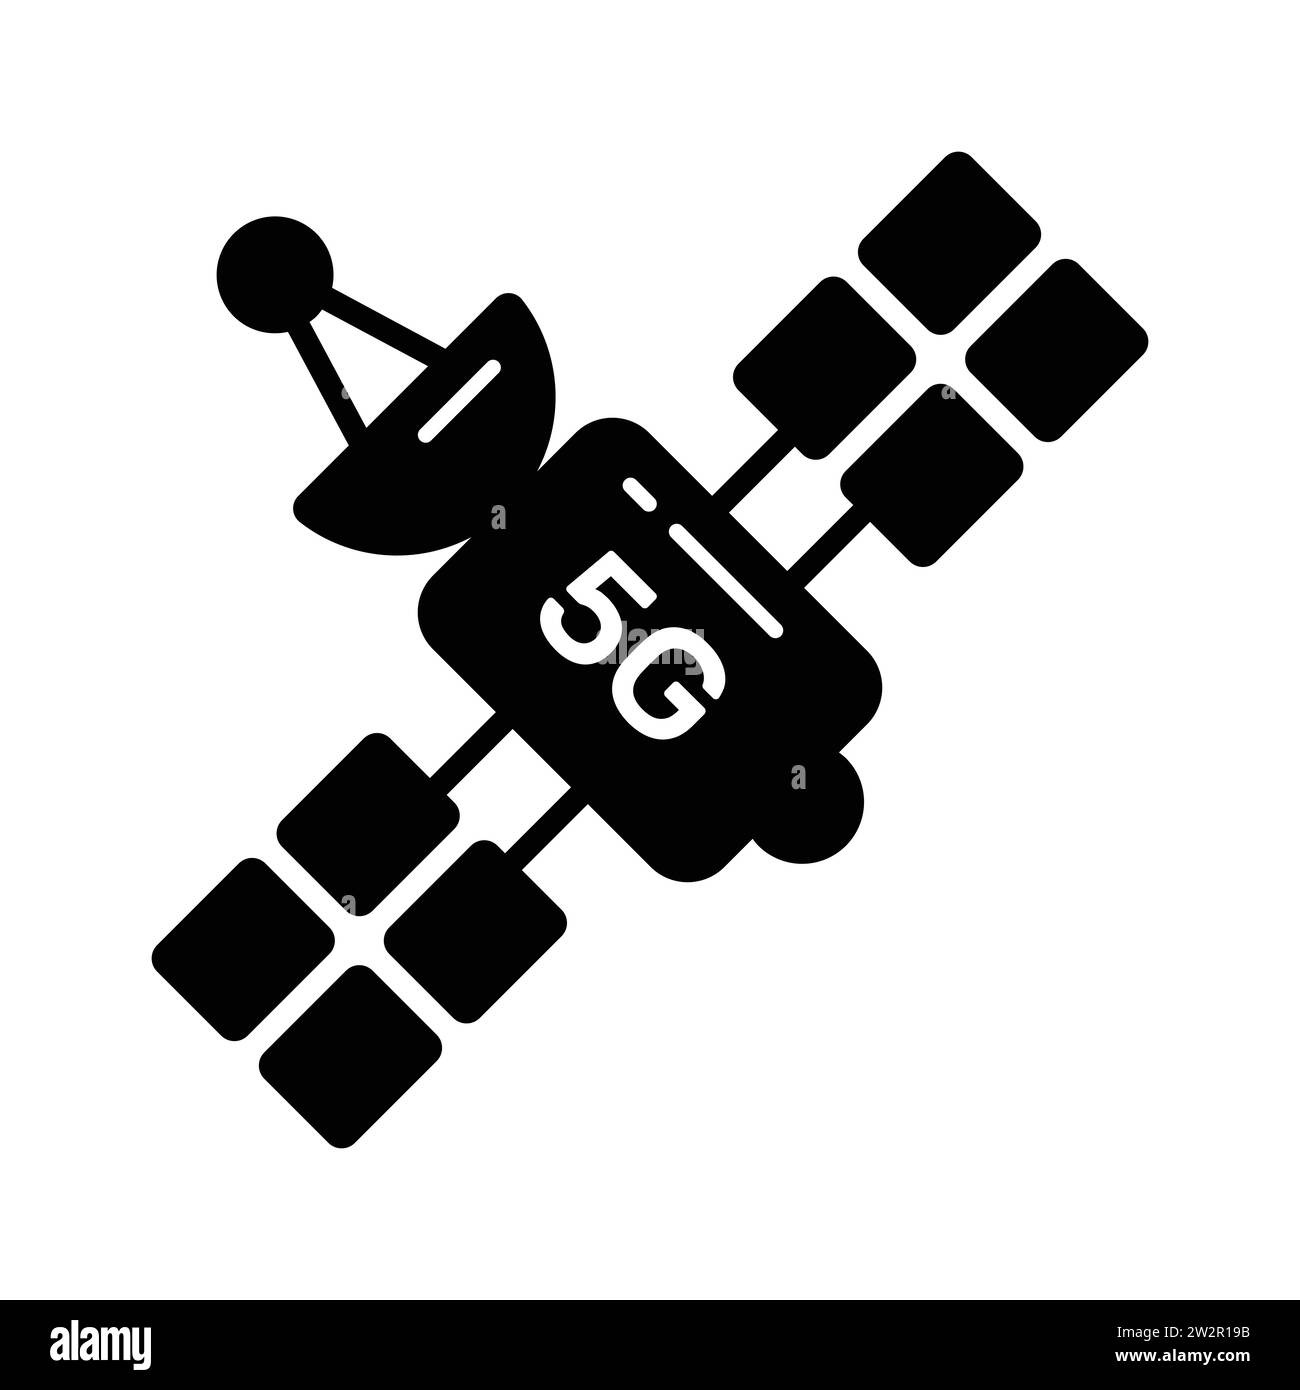 Space satellite vector design isolated on white background, 5G network technology icon Stock Vector